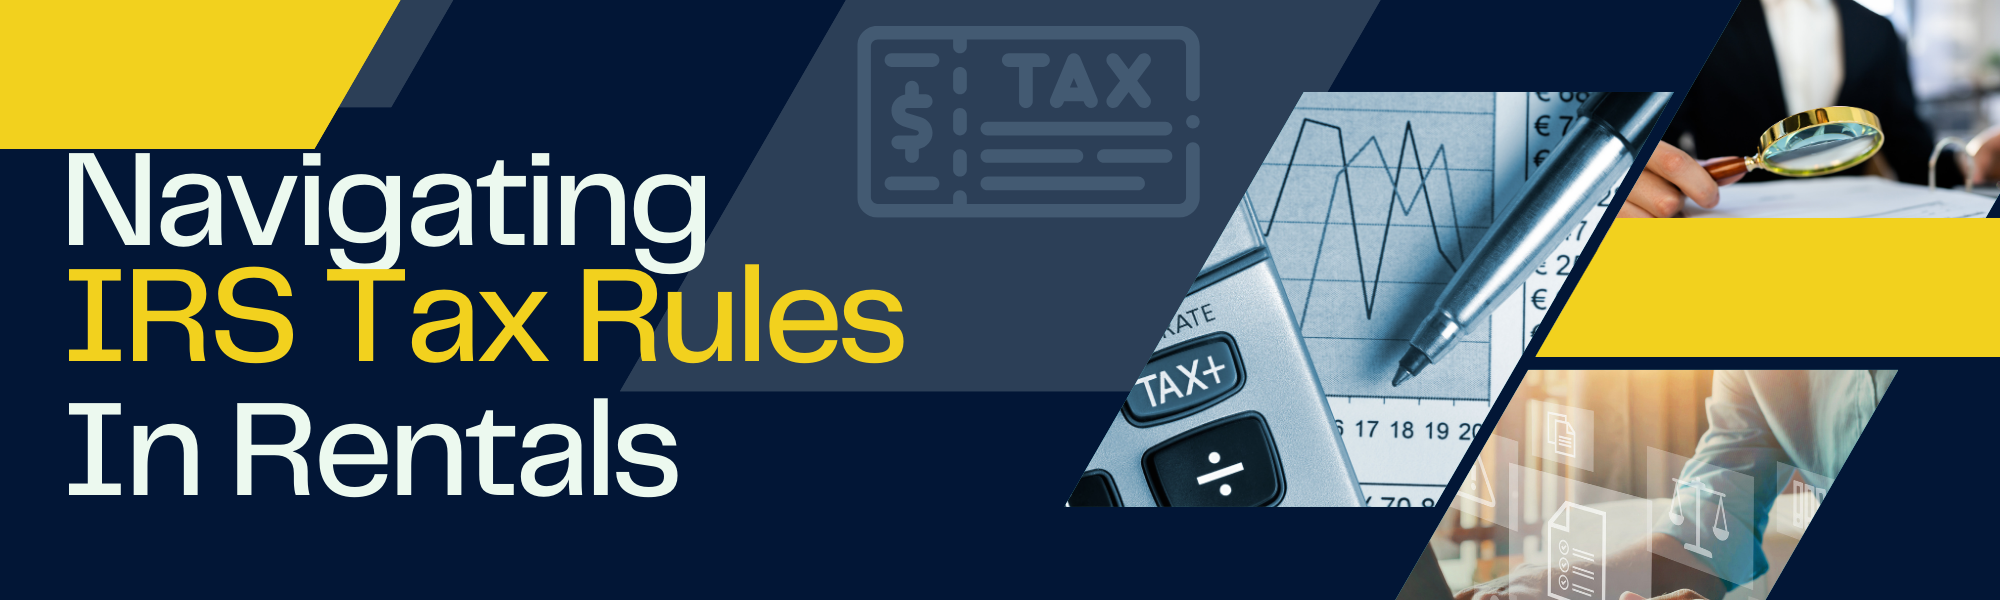 Learn the IRS tax rules and differences between short-term and long-term rentals. Understand tax benefits and liabilities as a rental property owner.